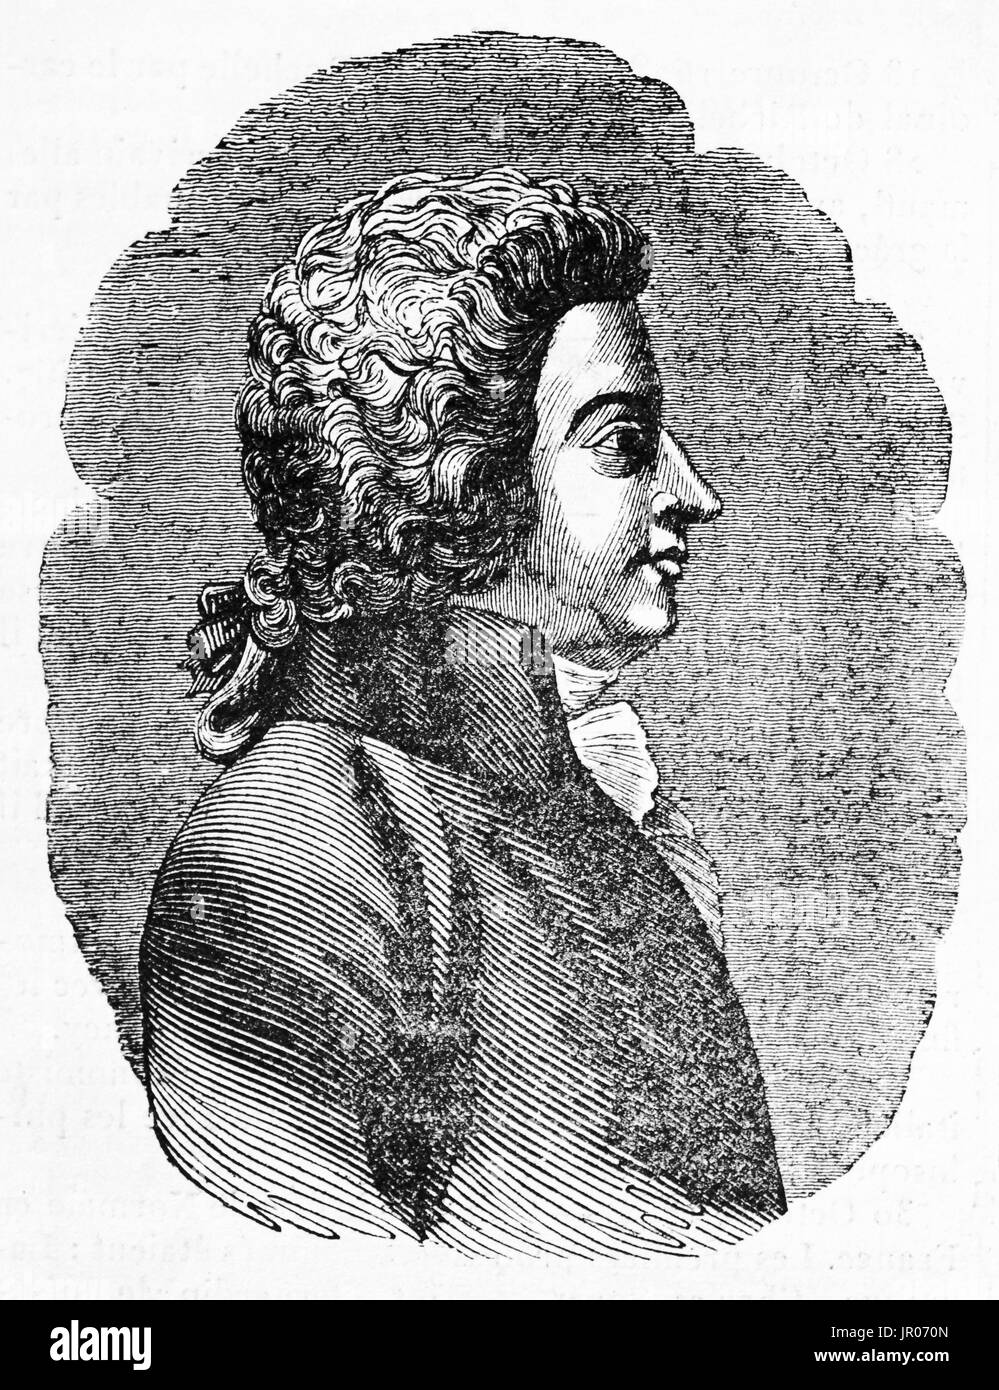 Old engraved portrait of Wolfgang Amadeus Mozart (1756 – 1791). Created by Jackson, published on Magasin Pittoresque, Paris, 1833. Stock Photo